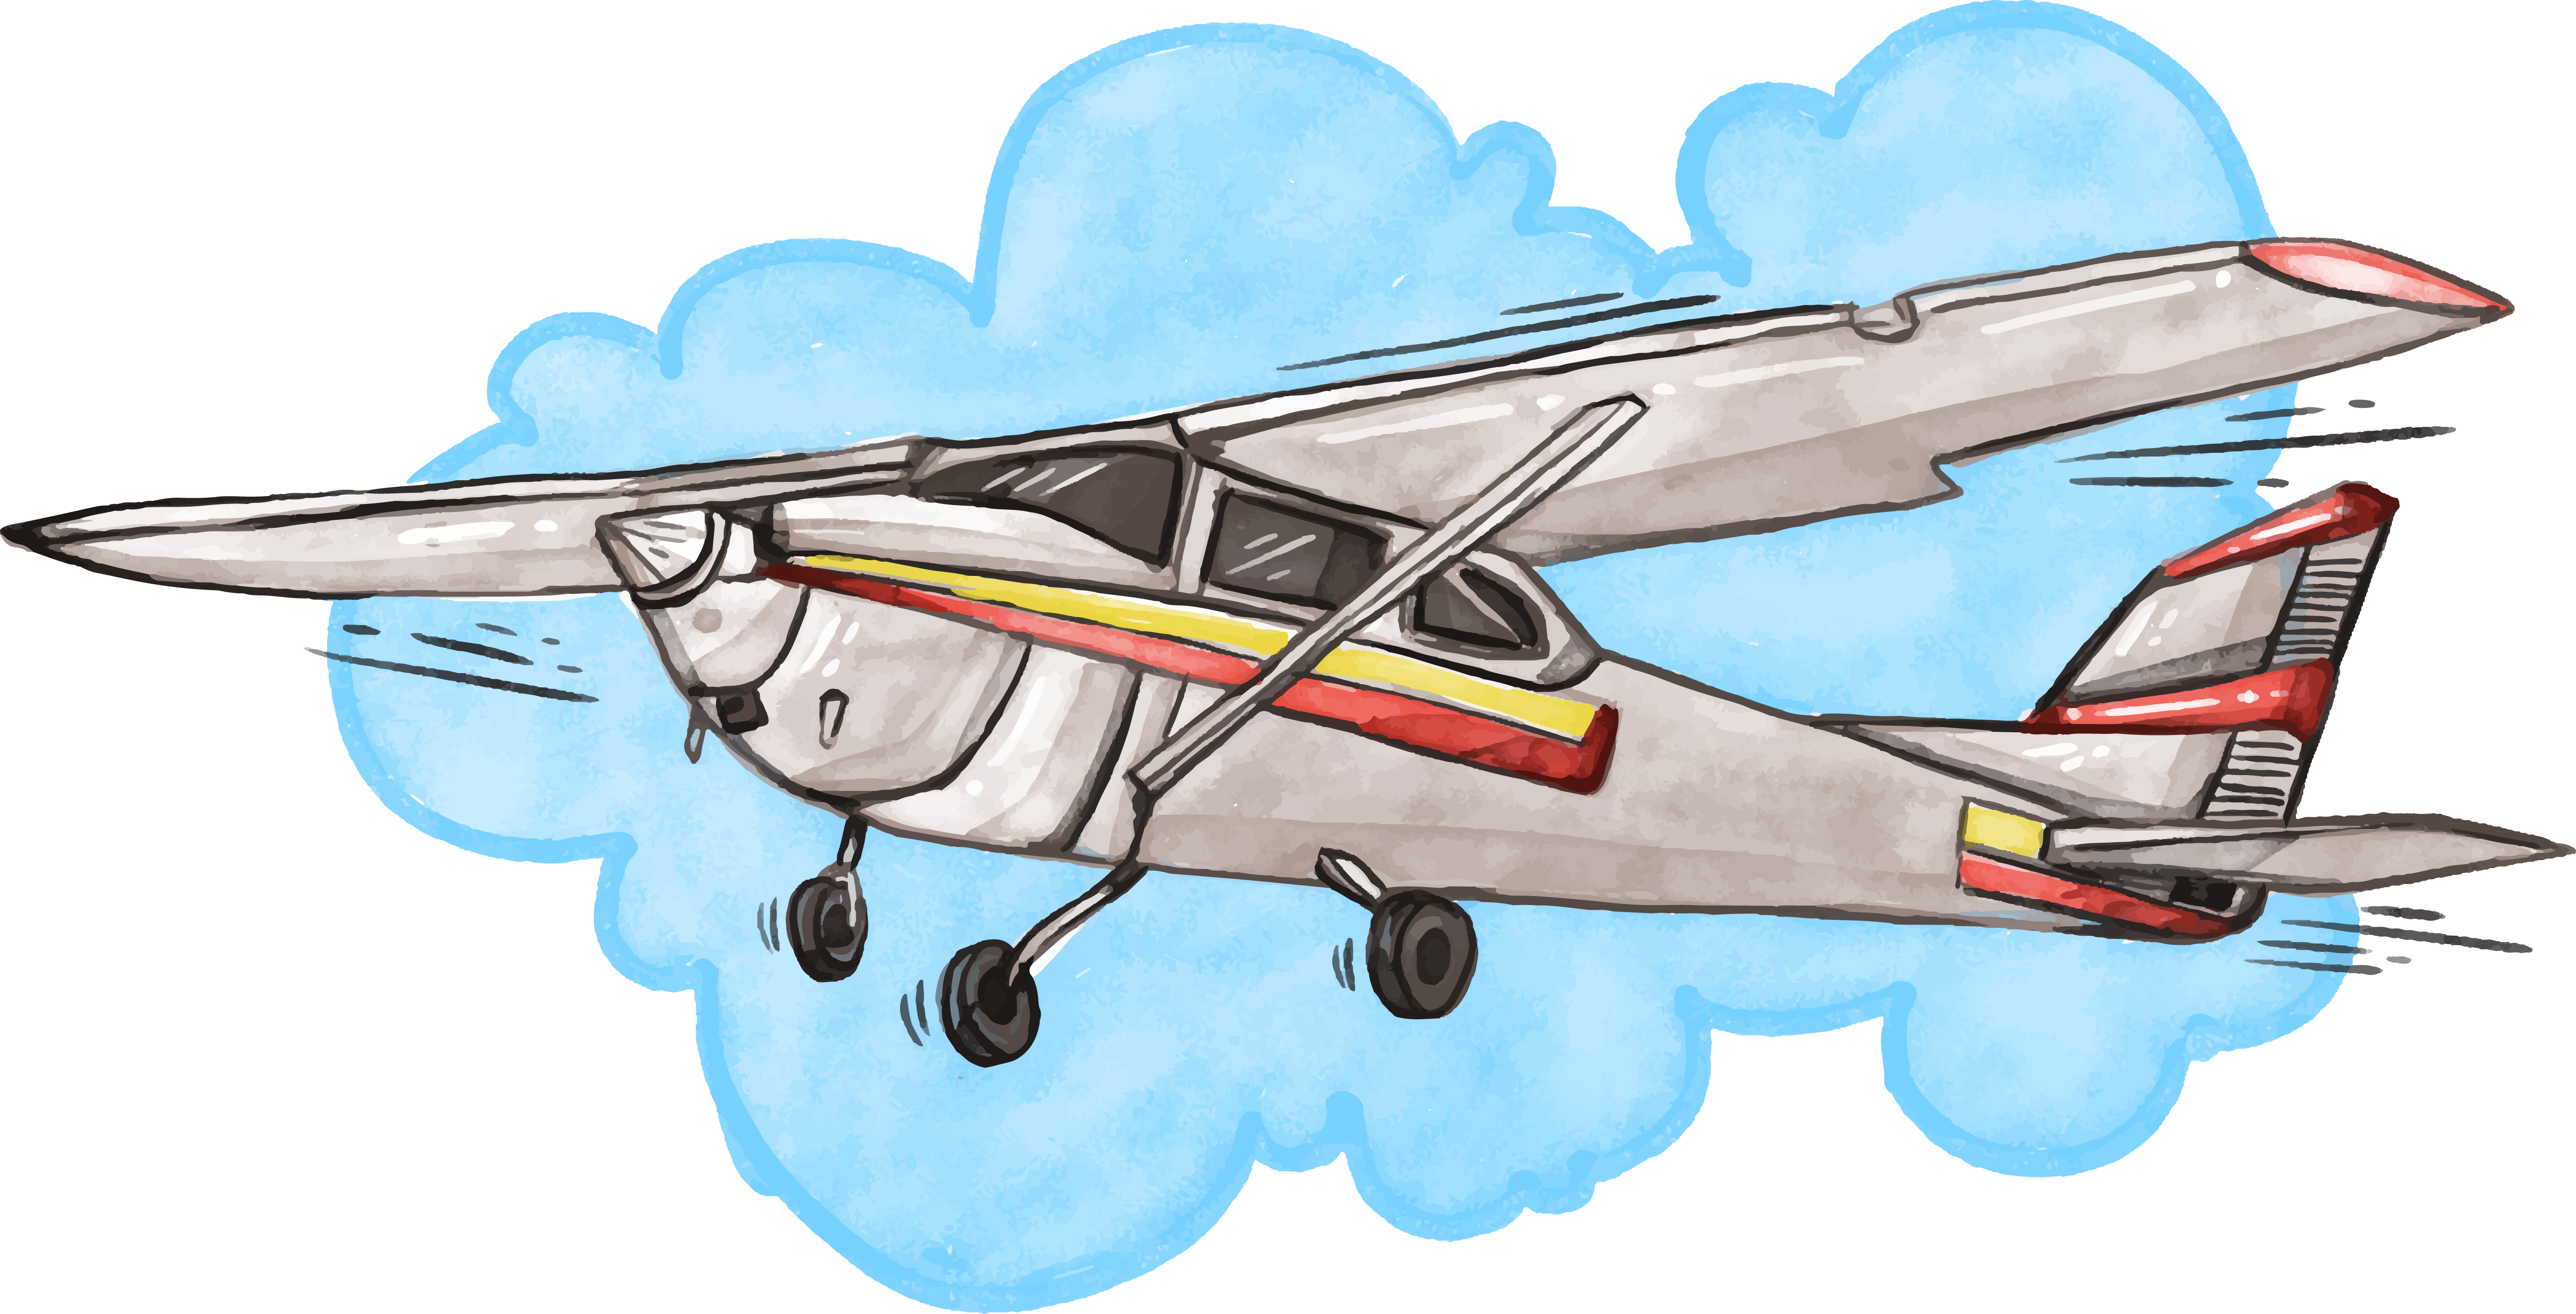 Flight Airplane Cessna 152 Sky Free Clipart HQ PNG Image